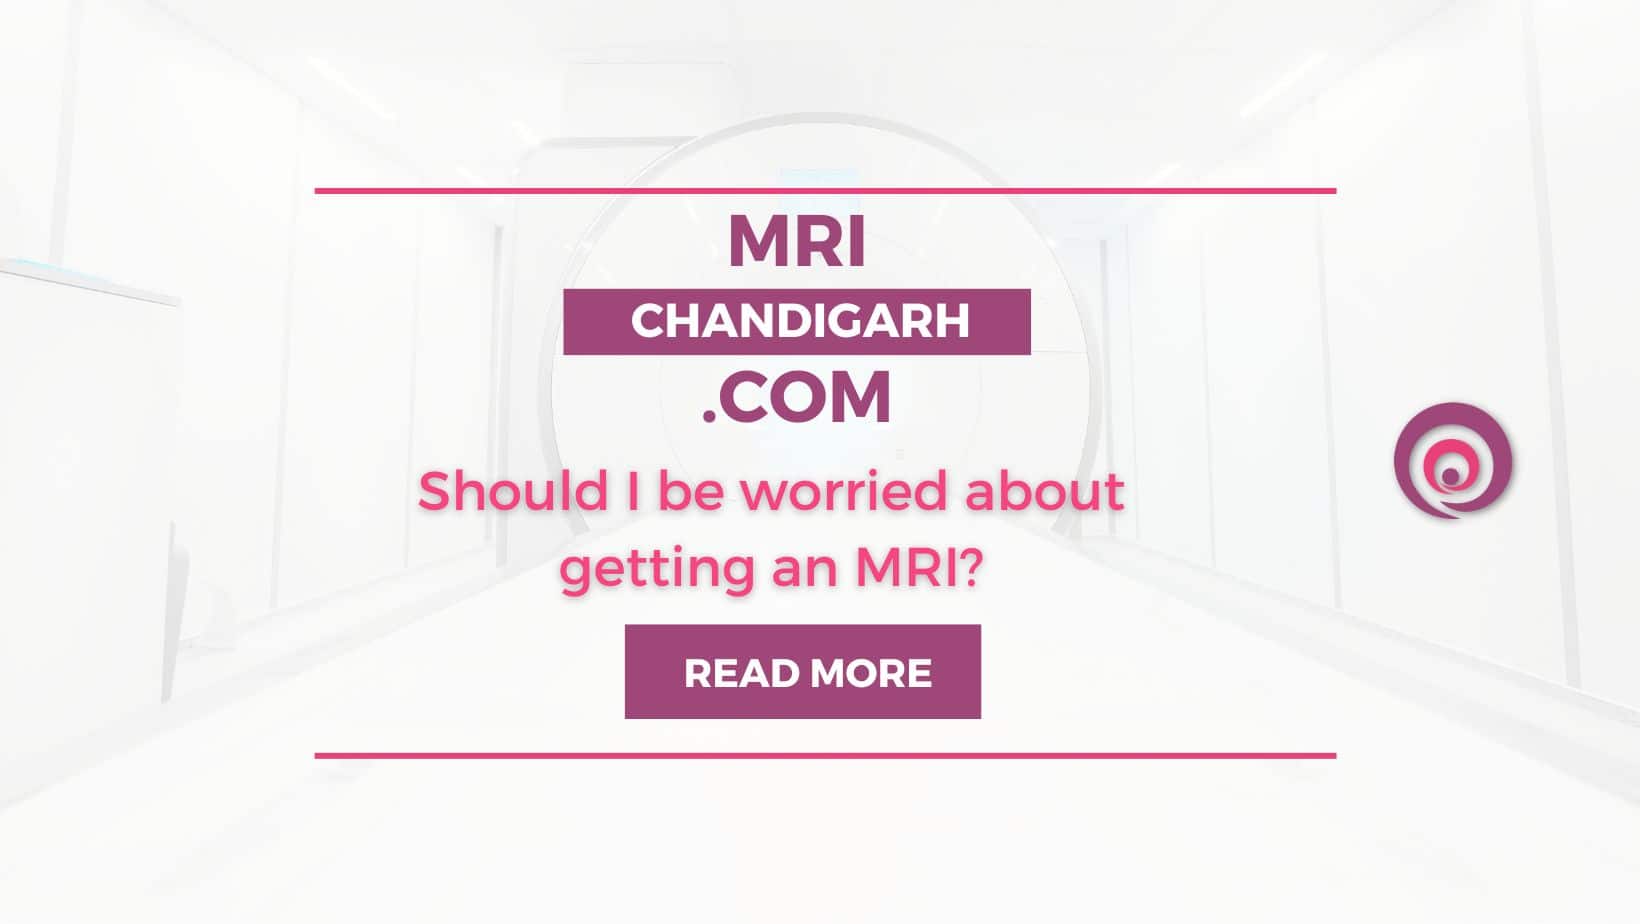 Should I be worried about getting an MRI?